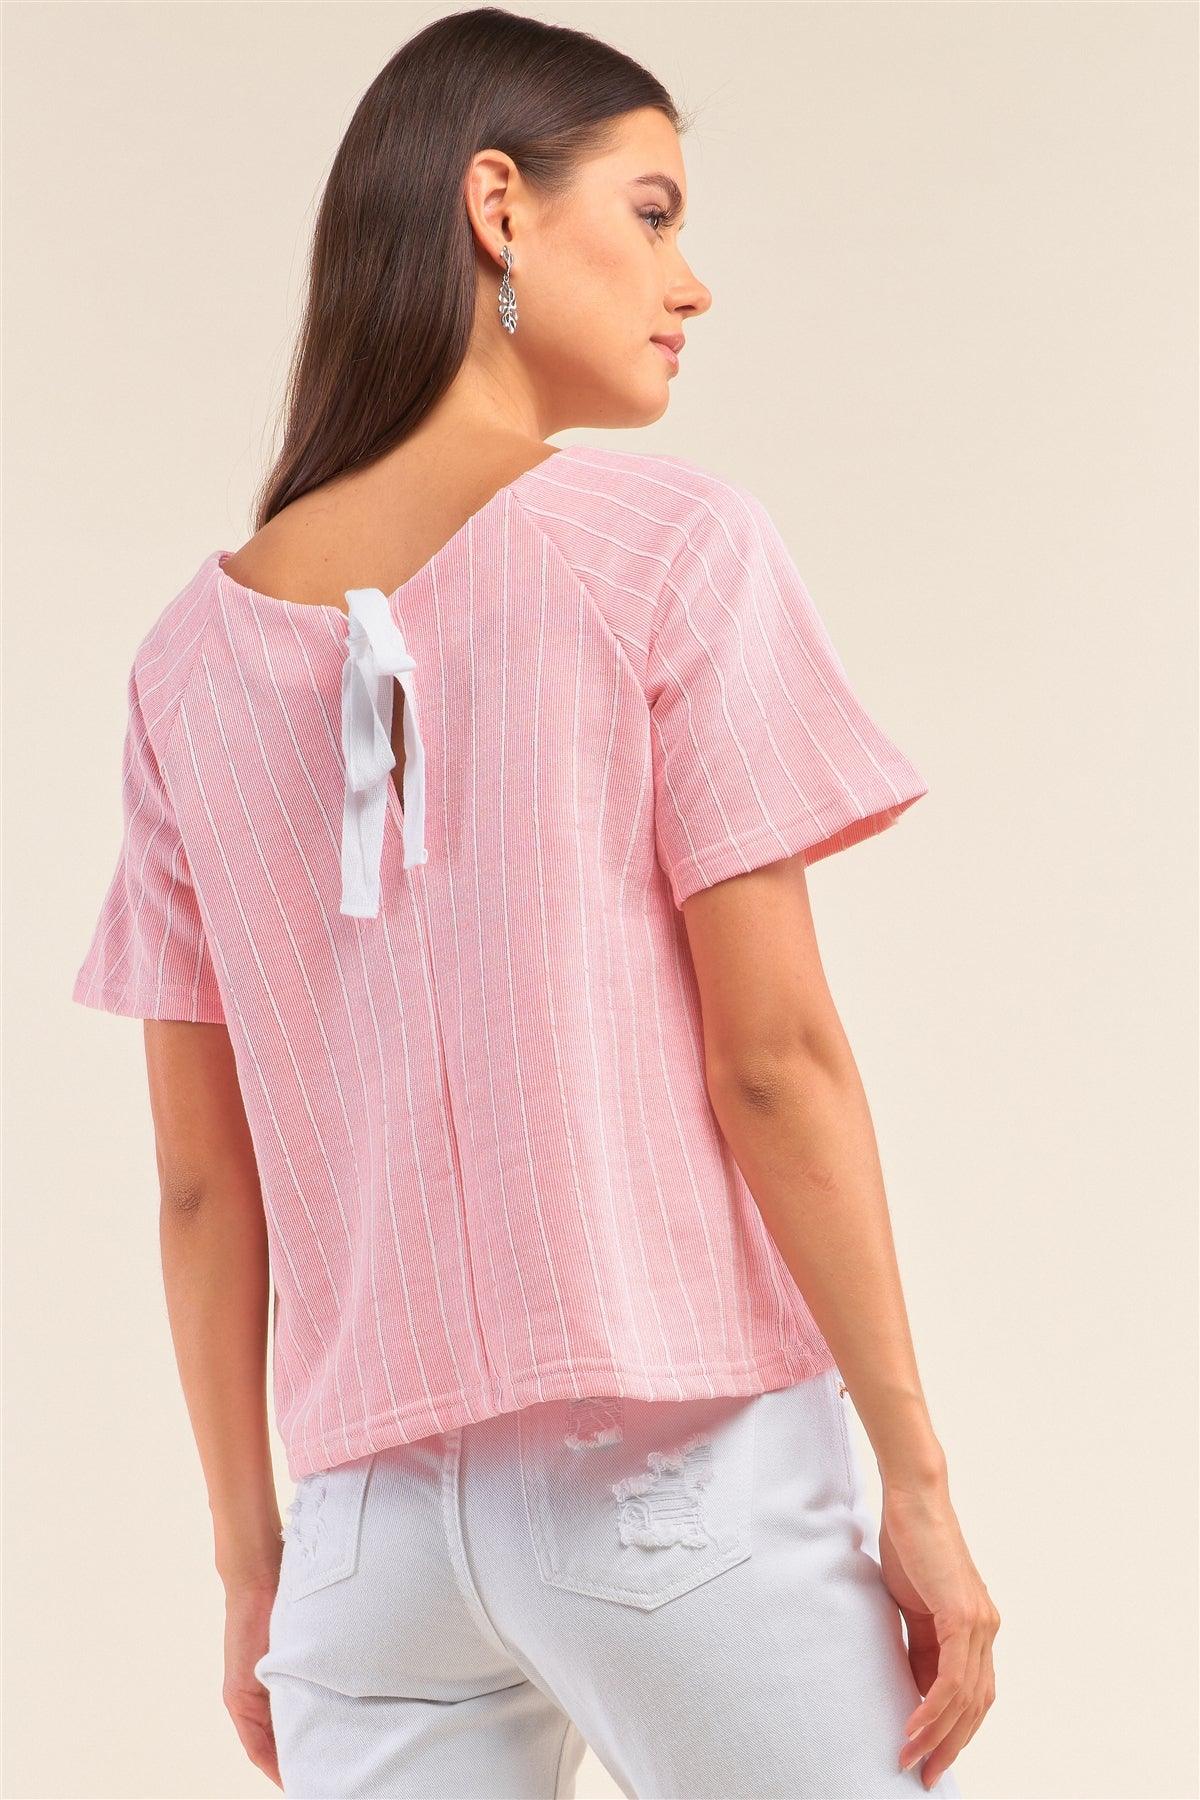 Pink&White Striped Bootlace Loop Chest Detail Self-Tie Back Relaxed Fit Shirt /1-2-2-1